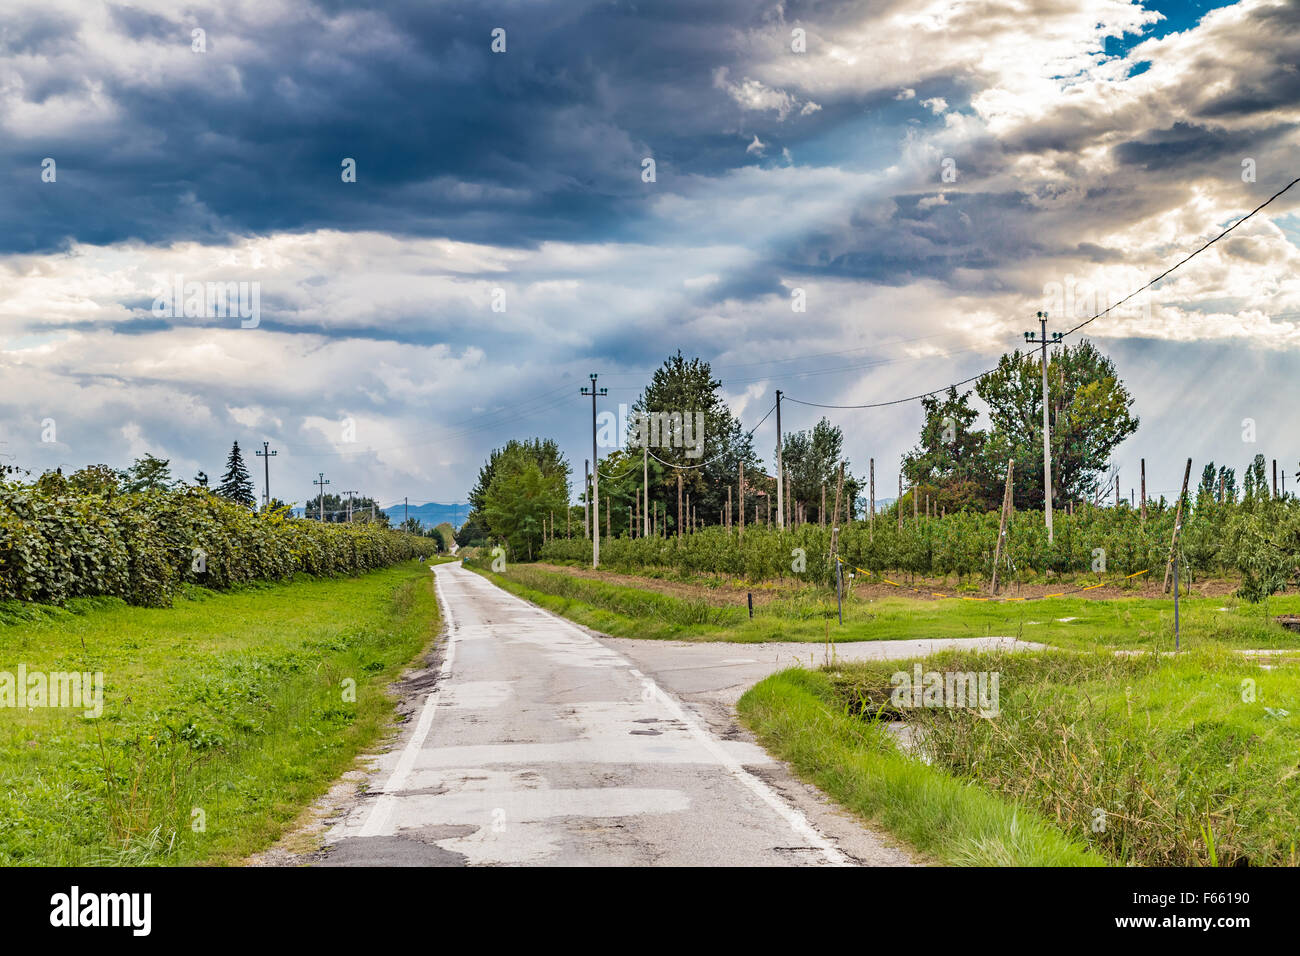 country road that forks into two directions, one barred Stock Photo